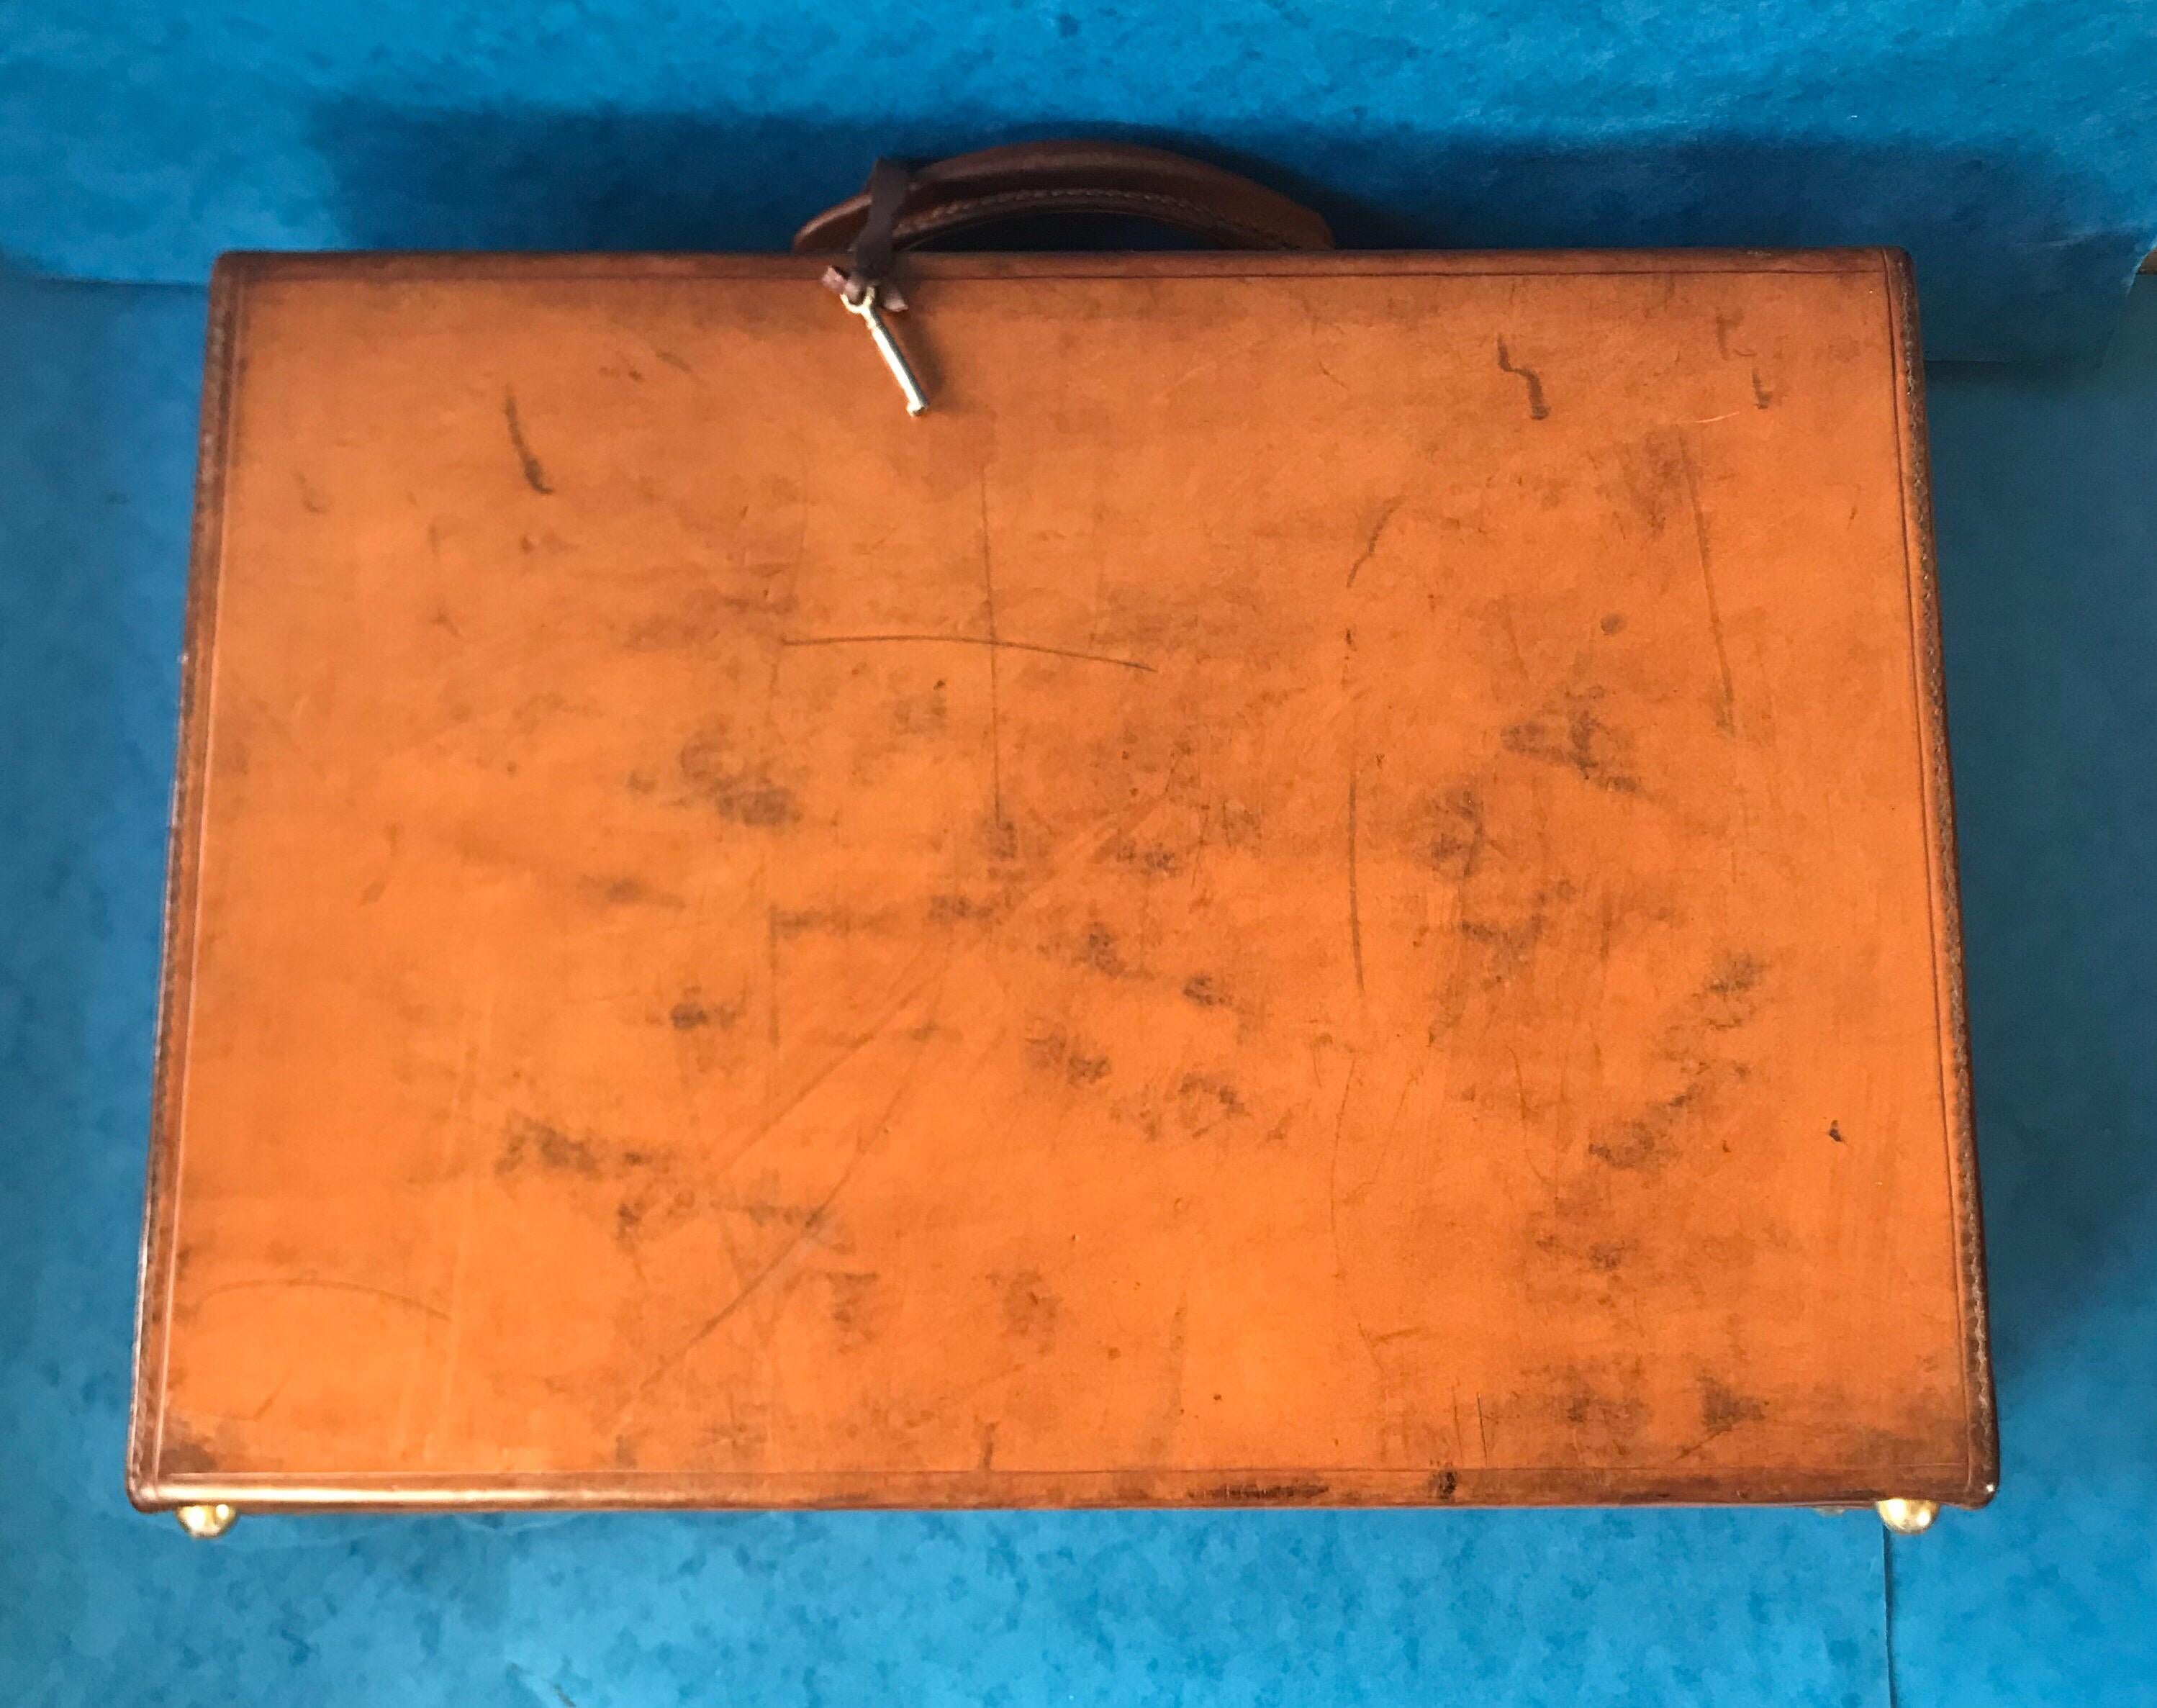 1960-1970 Hide Leather Attaché Case by “W & H Gidden” 1